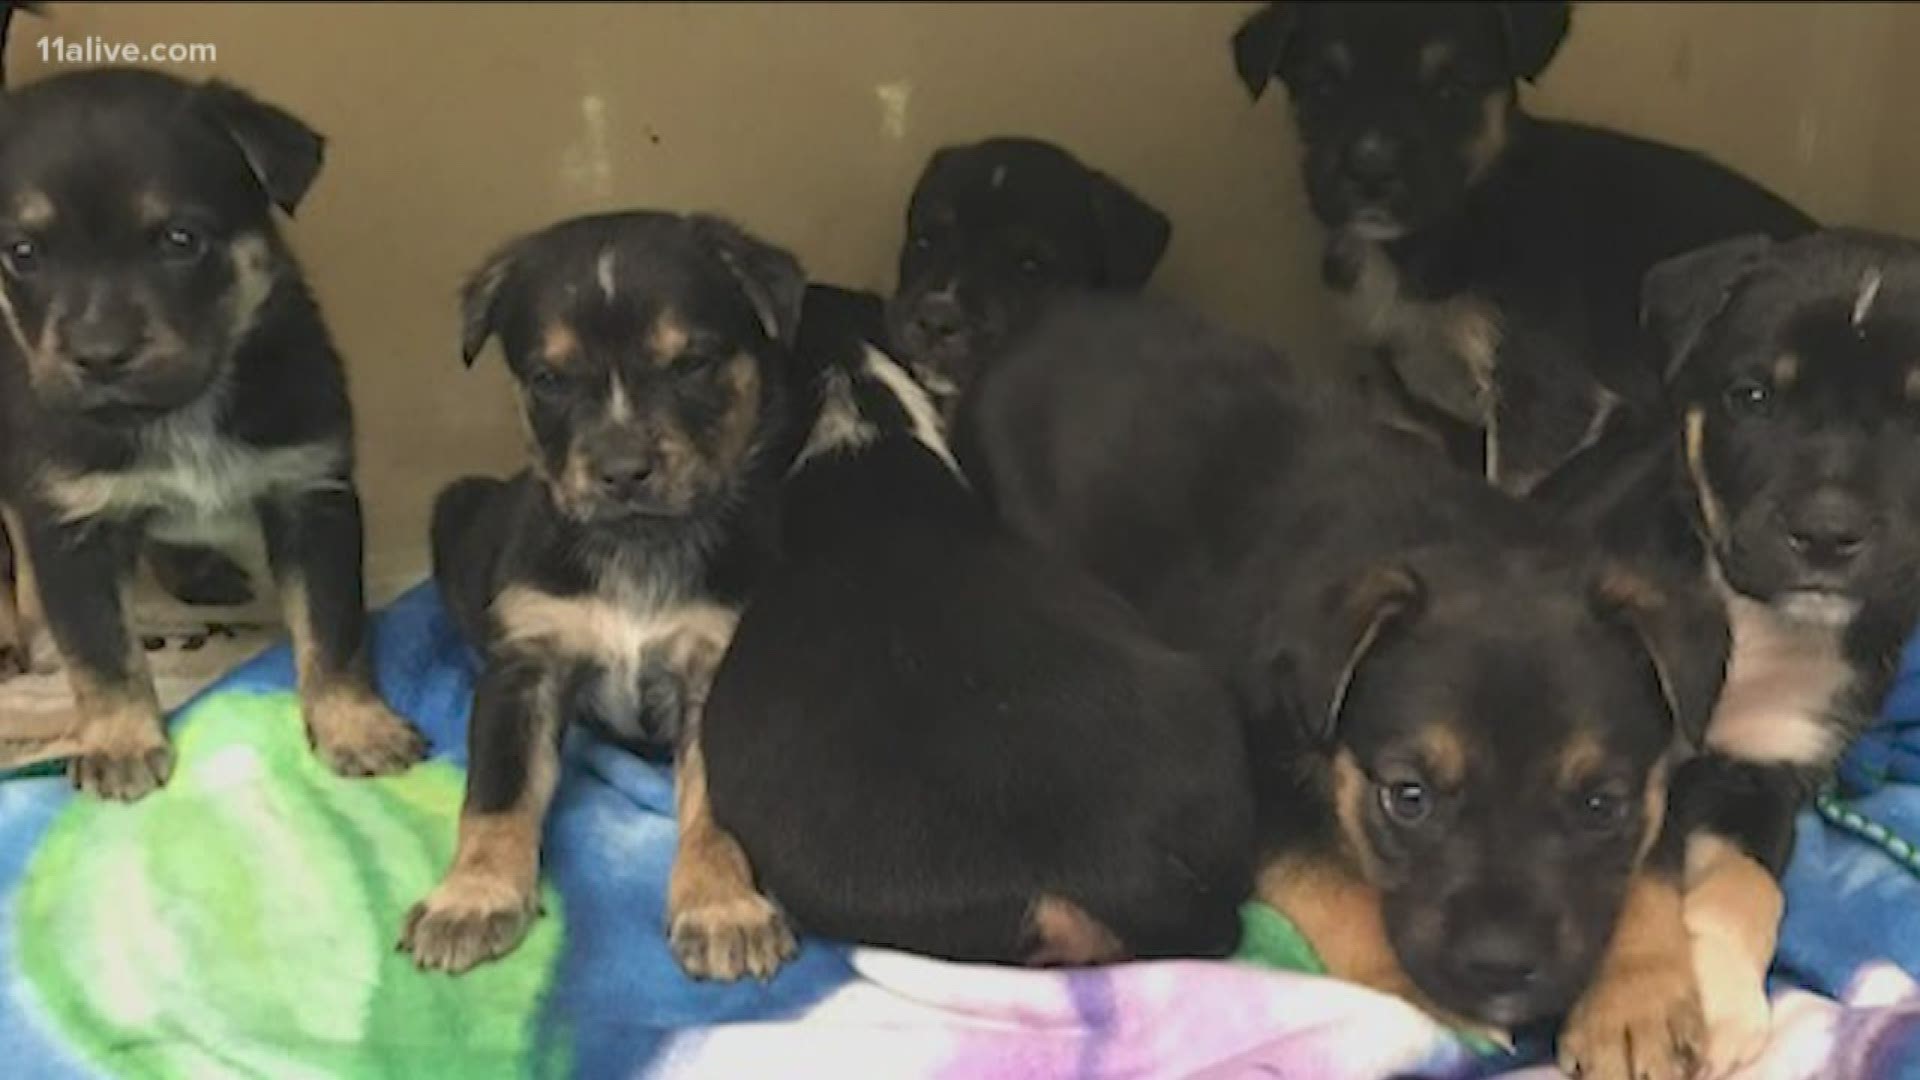 Animal control reporting double the amount of 'aggressive' dog calls for people trying to get rid of their animals because of illness and financial concerns.